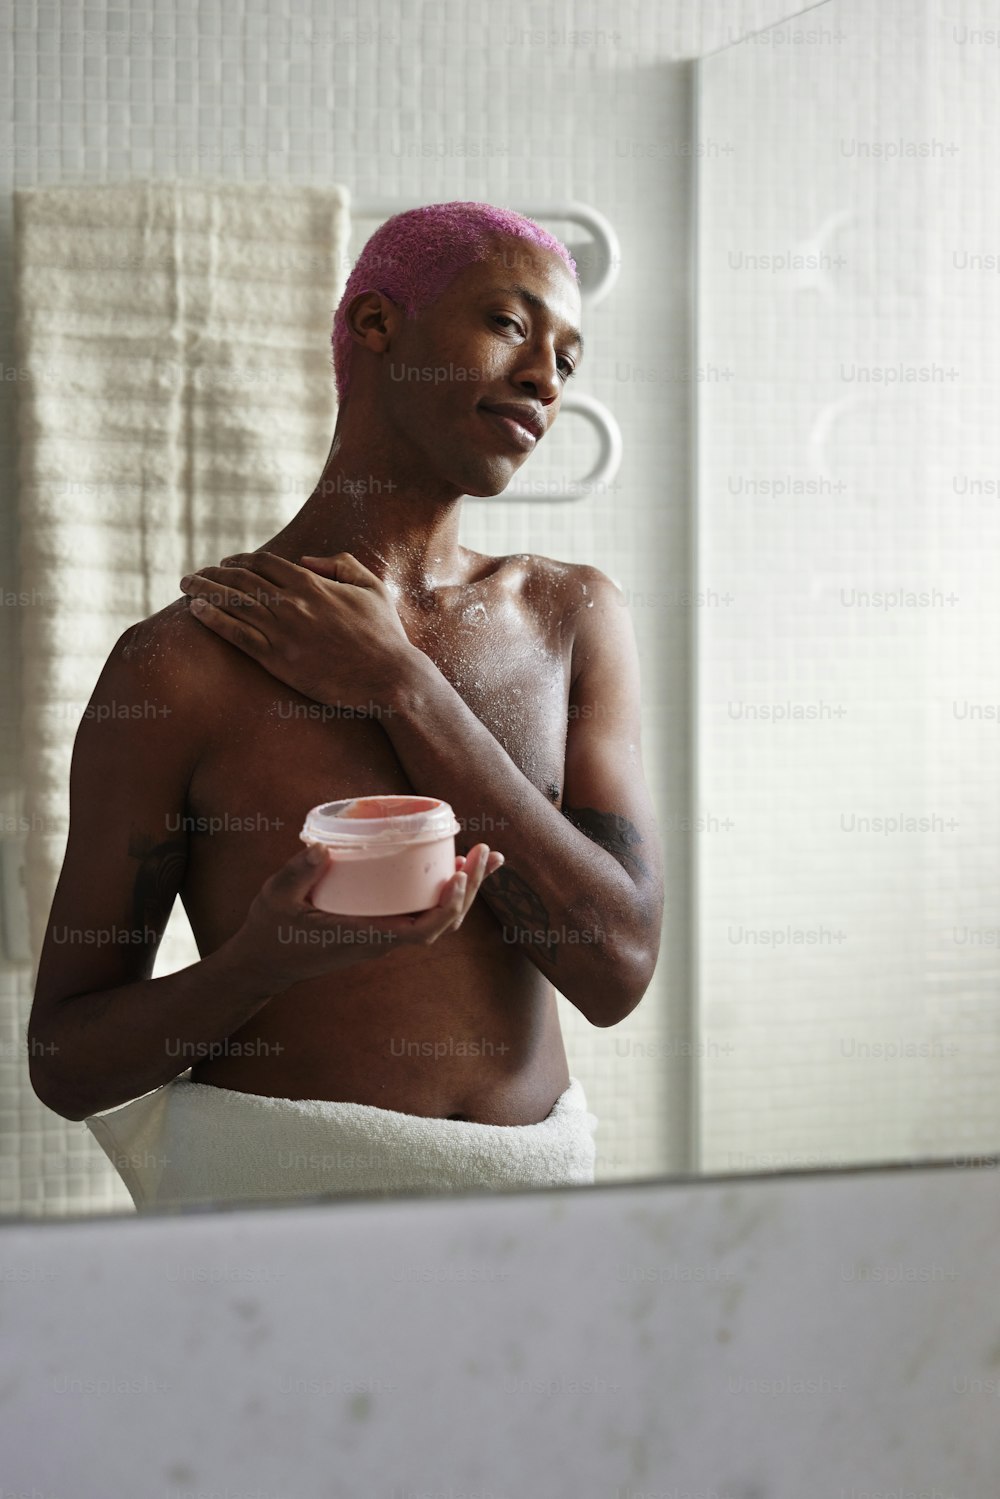 a man with a pink towel on his head and a cup in his hand